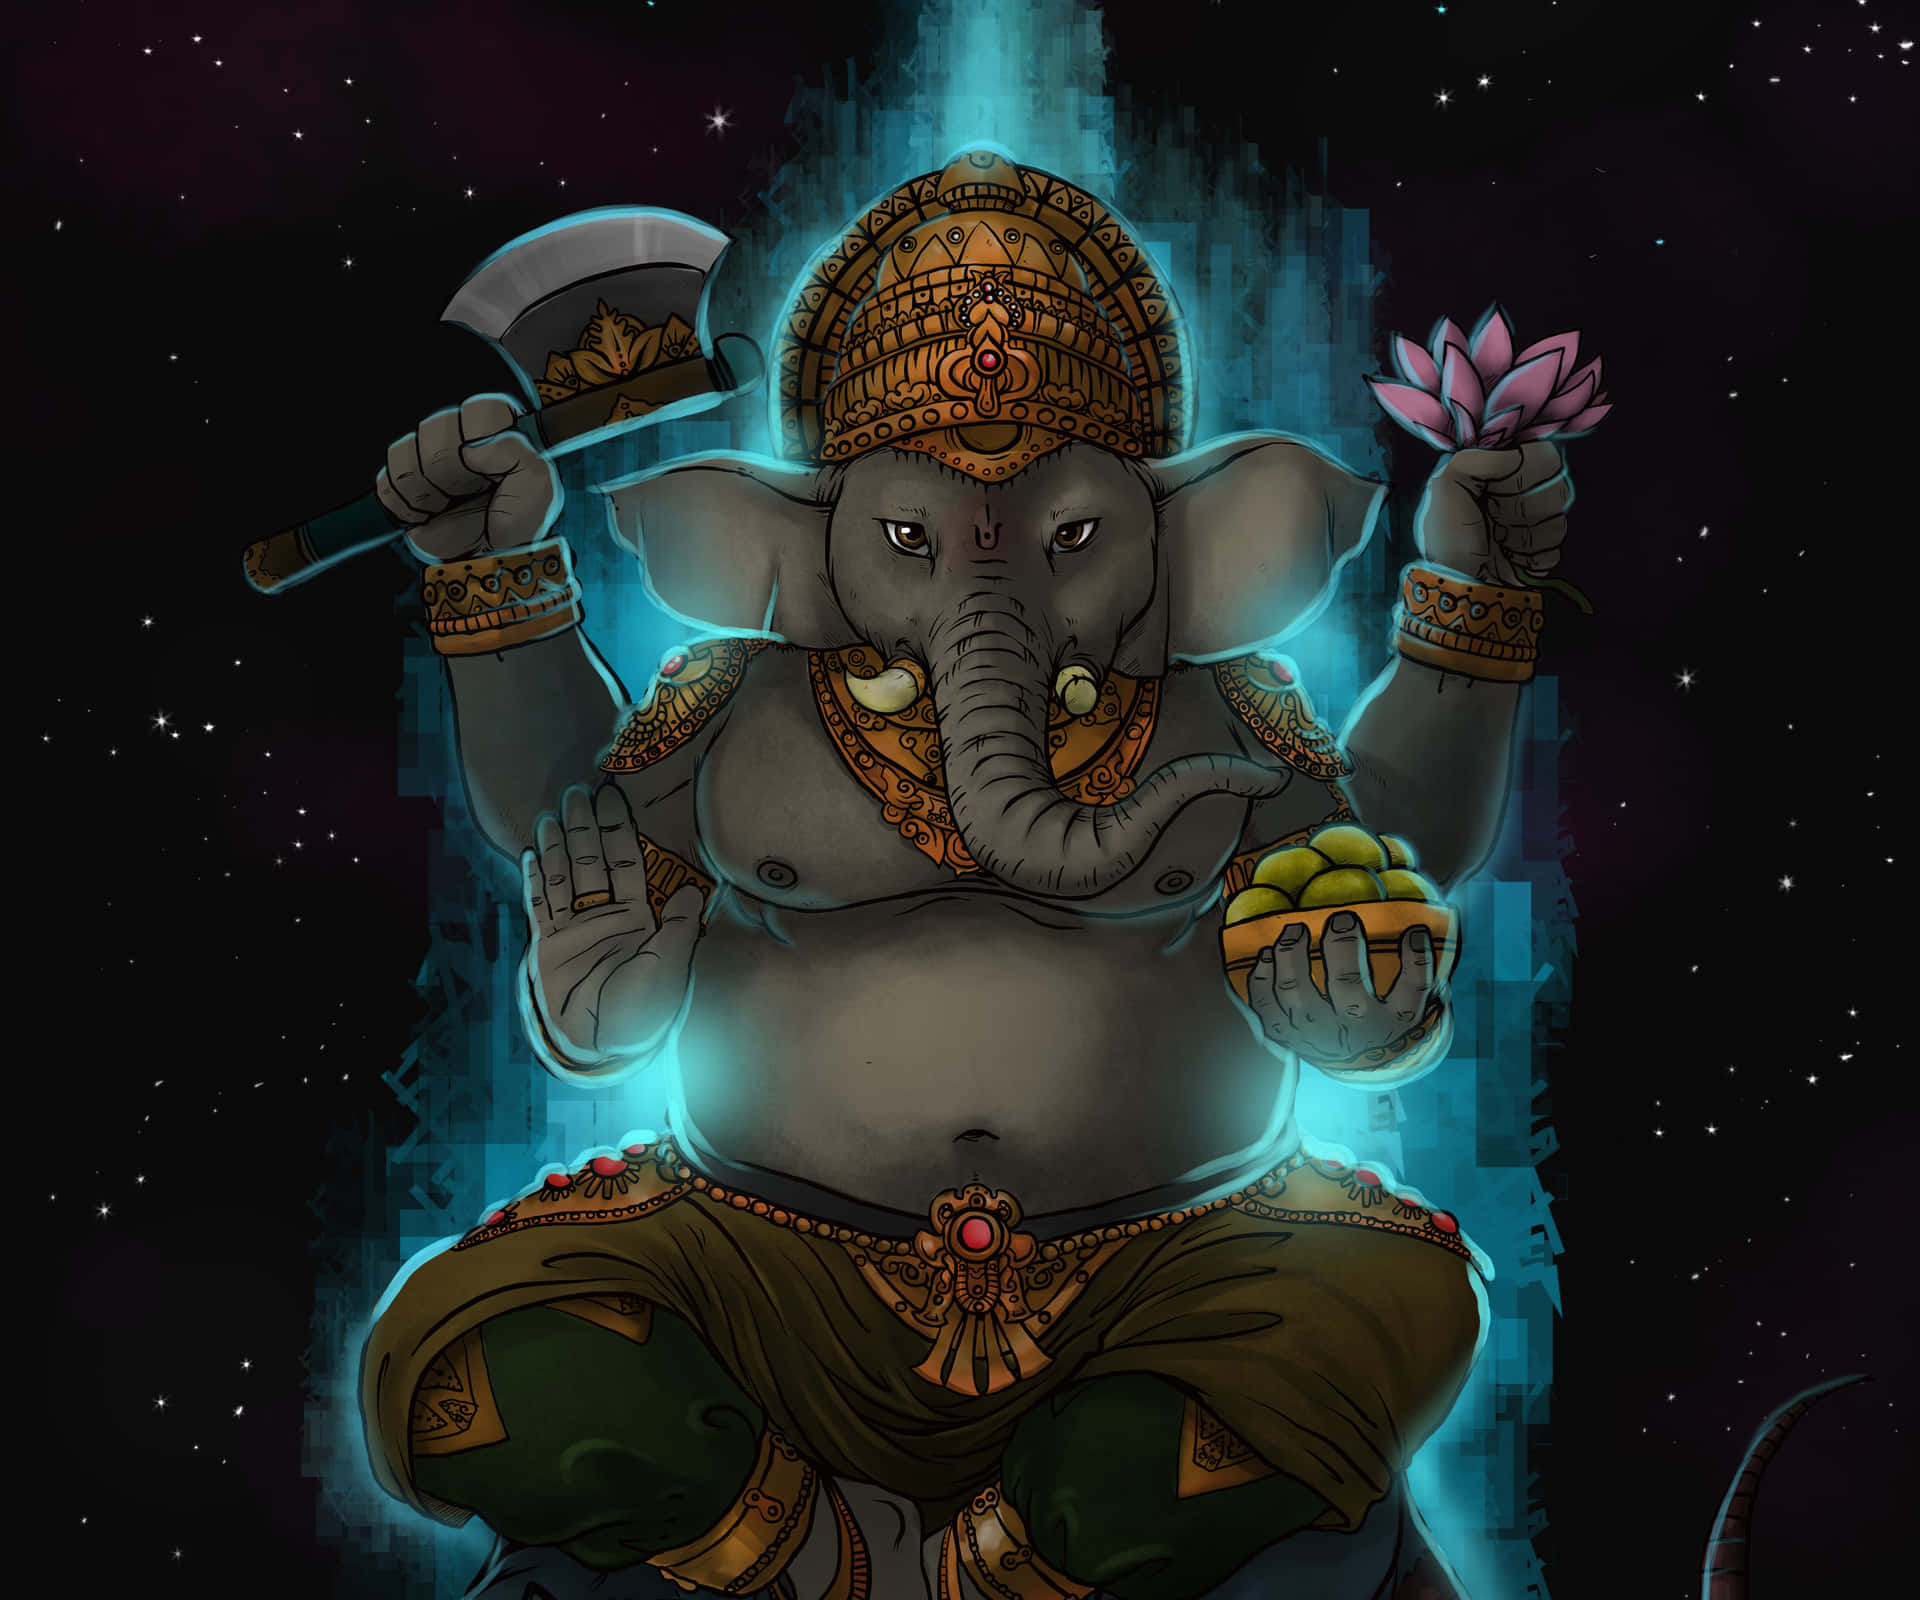 Lord Ganesha, remover of obstacles